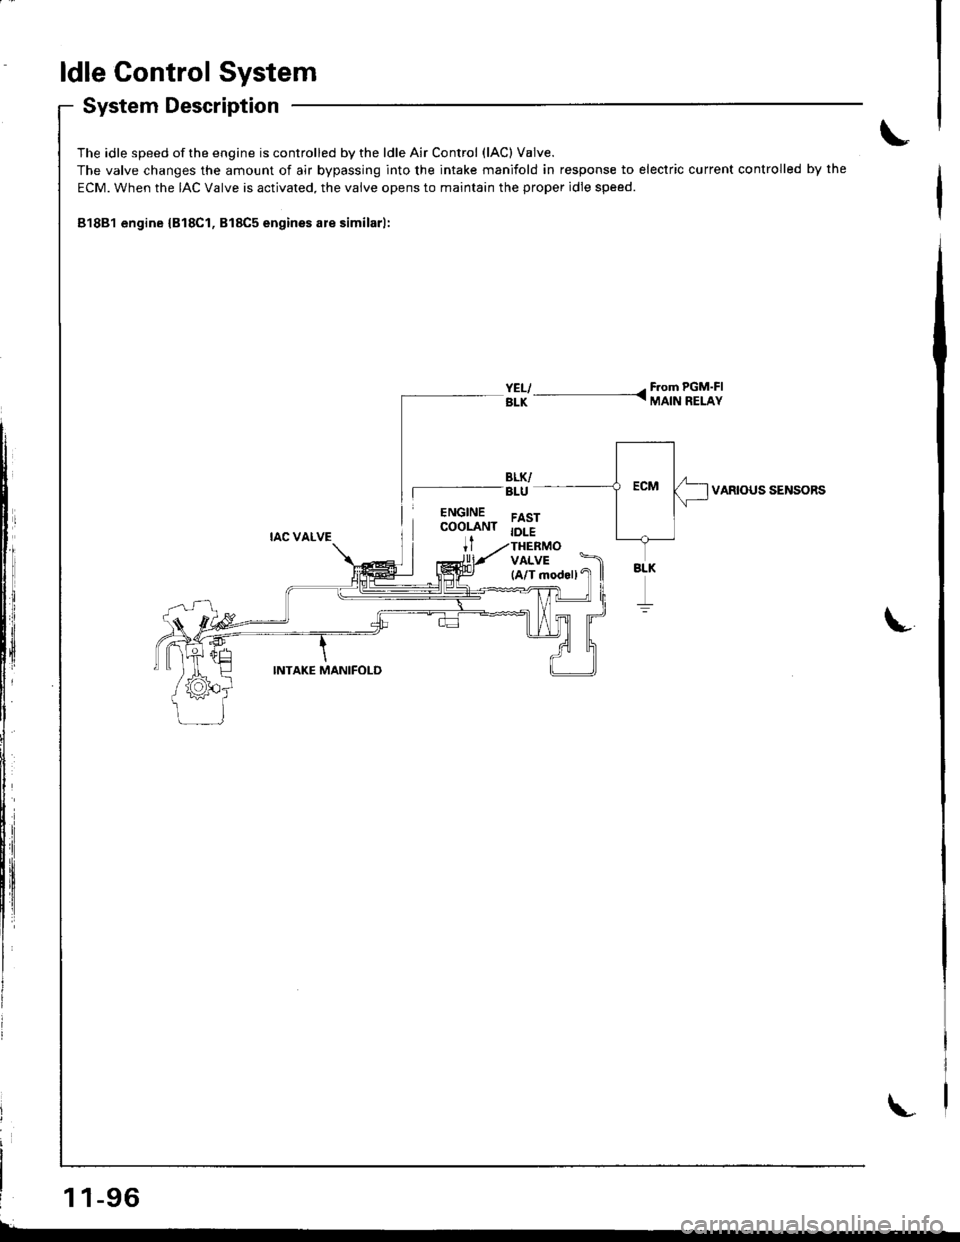 HONDA INTEGRA 1998 4.G Workshop Manual ldle Control System
System Description
The idle speed of the engine is controlled by the ldle Air Control (lAC) V8lve.
The valve changes the amount of air bypassing into the intake manifold in respons